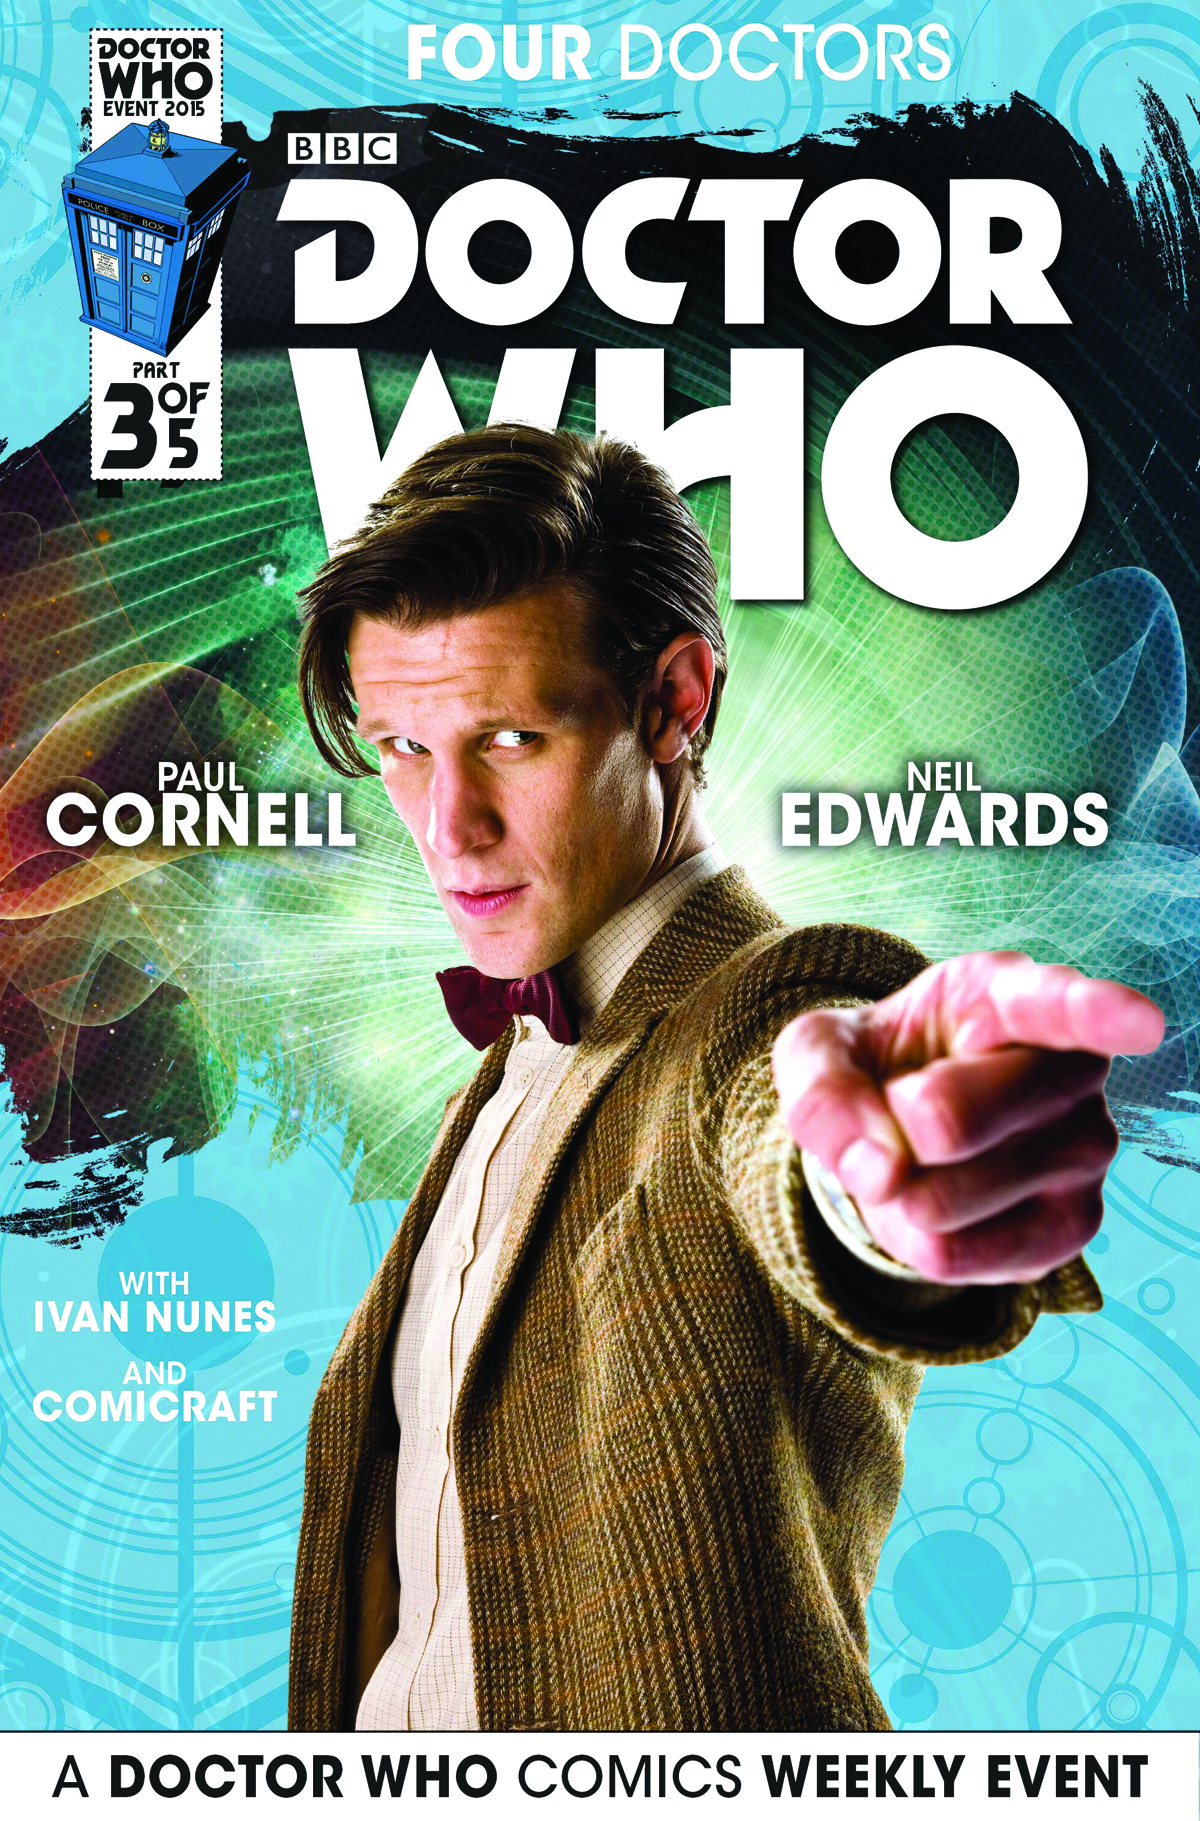 DOCTOR WHO 2015 FOUR DOCTORS #3 (OF 5) SUBSCRIPTION PHOTO (C